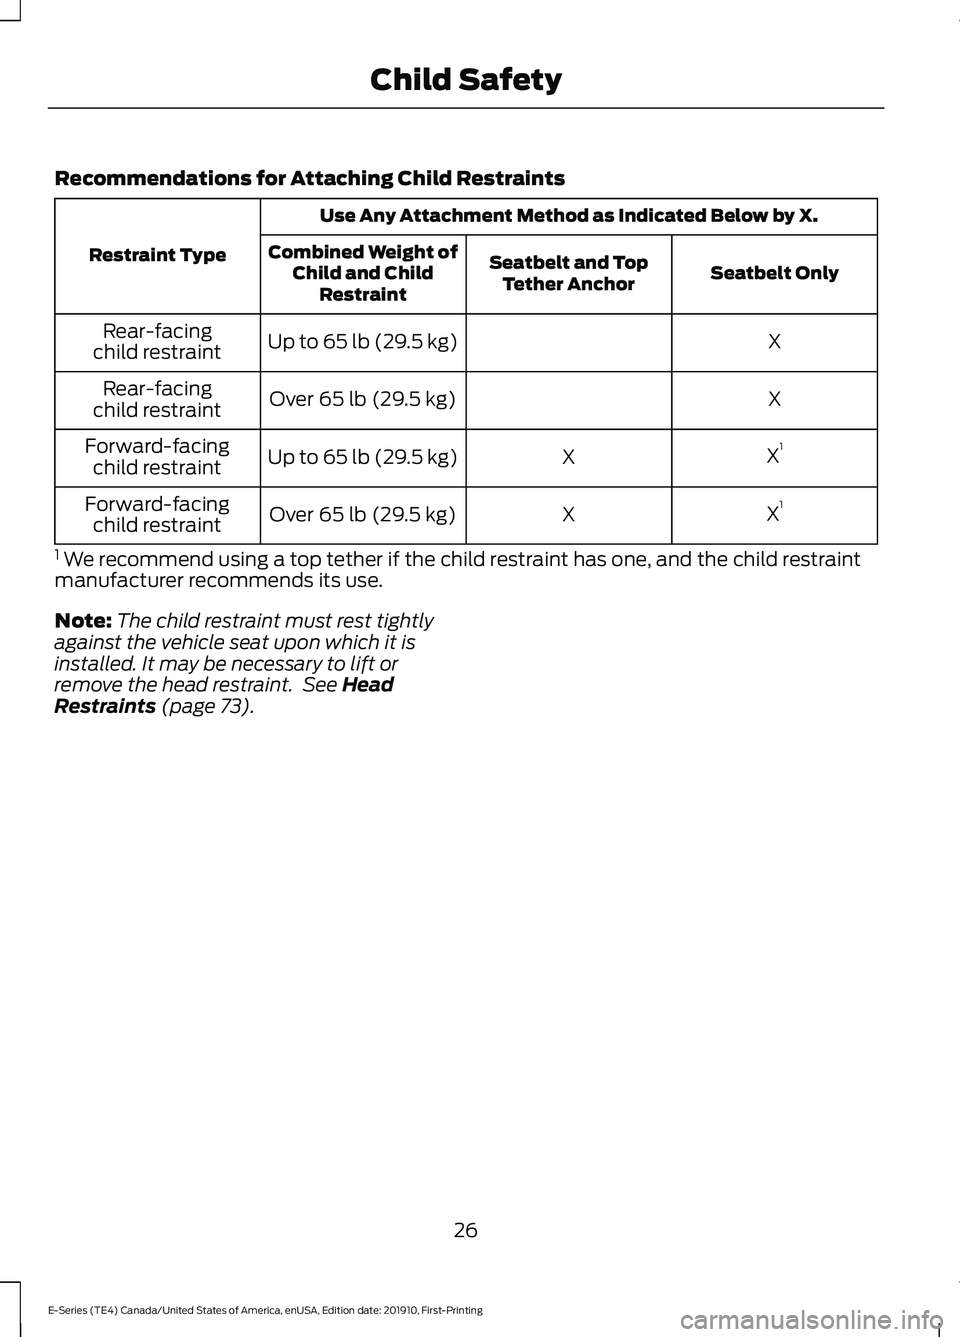 FORD E-450 2021 Owners Manual Recommendations for Attaching Child Restraints
Use Any Attachment Method as Indicated Below by X.
Restraint Type Seatbelt Only
Seatbelt and Top
Tether Anchor
Combined Weight of
Child and Child Restrai